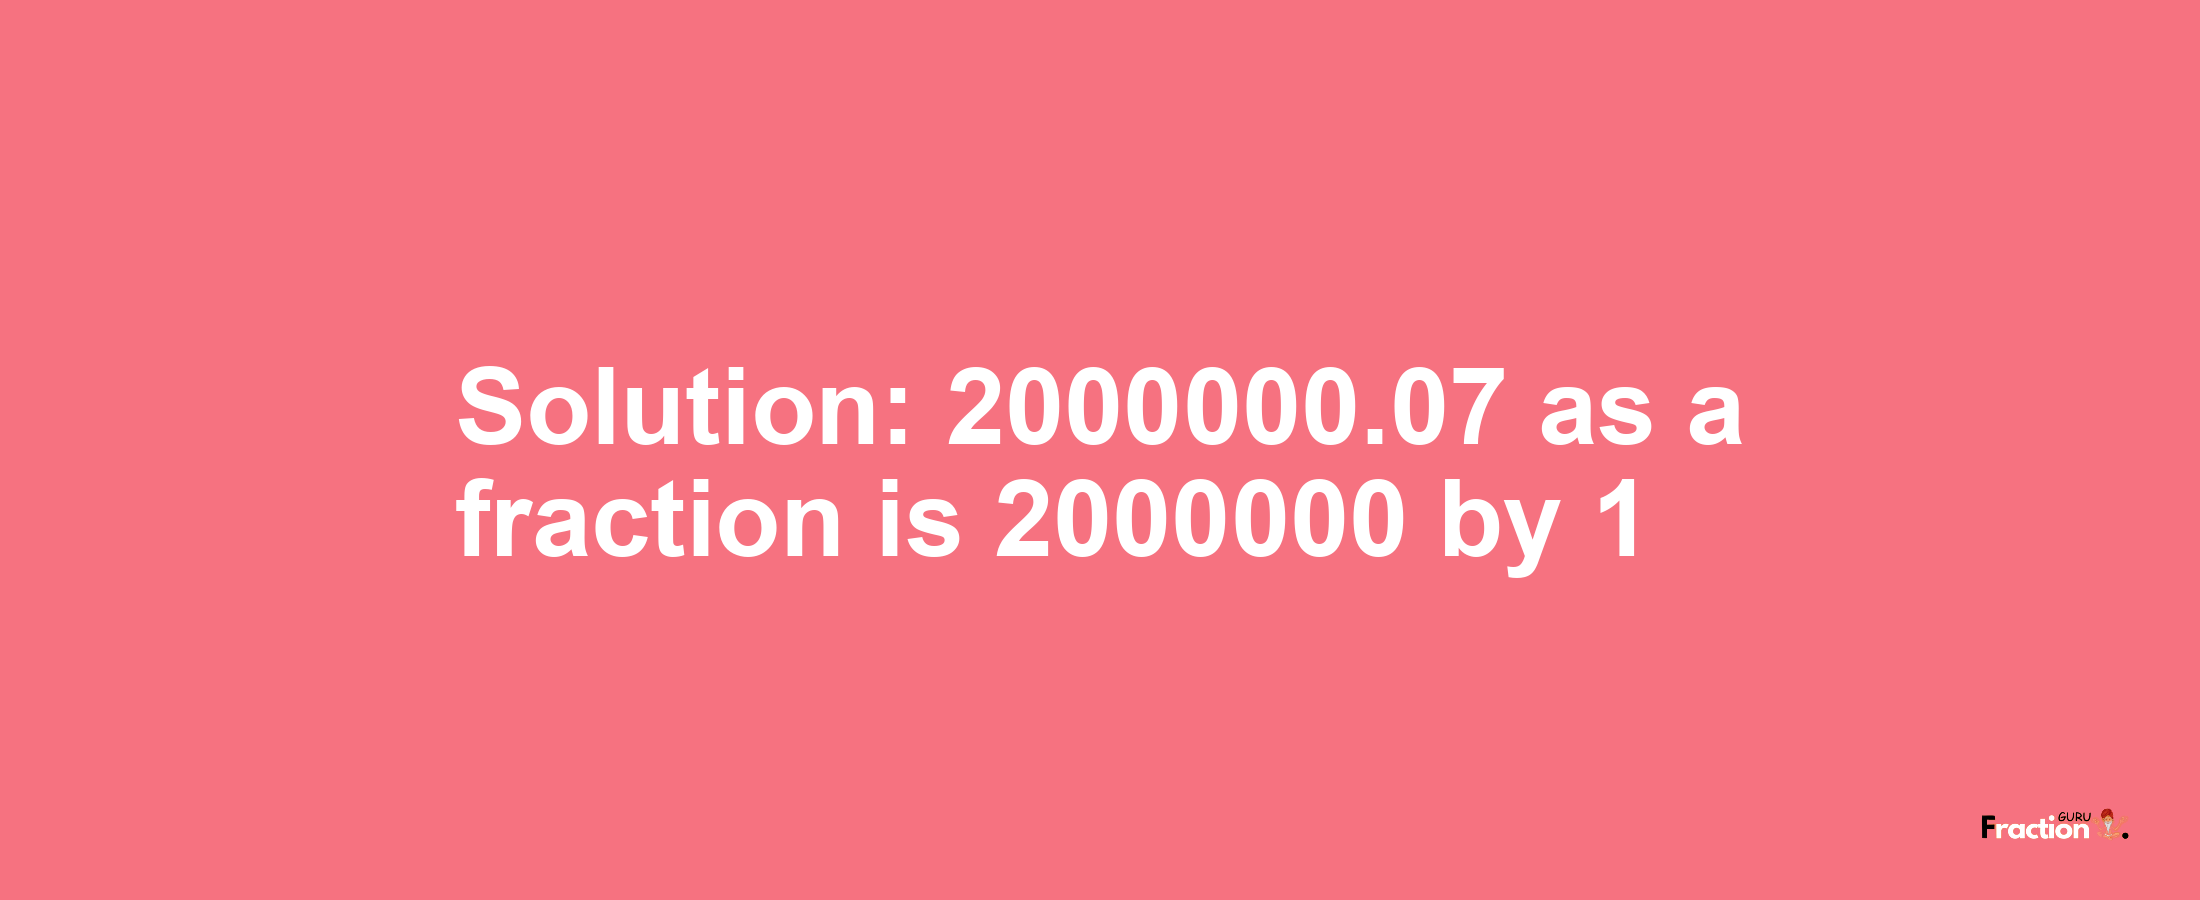 Solution:2000000.07 as a fraction is 2000000/1